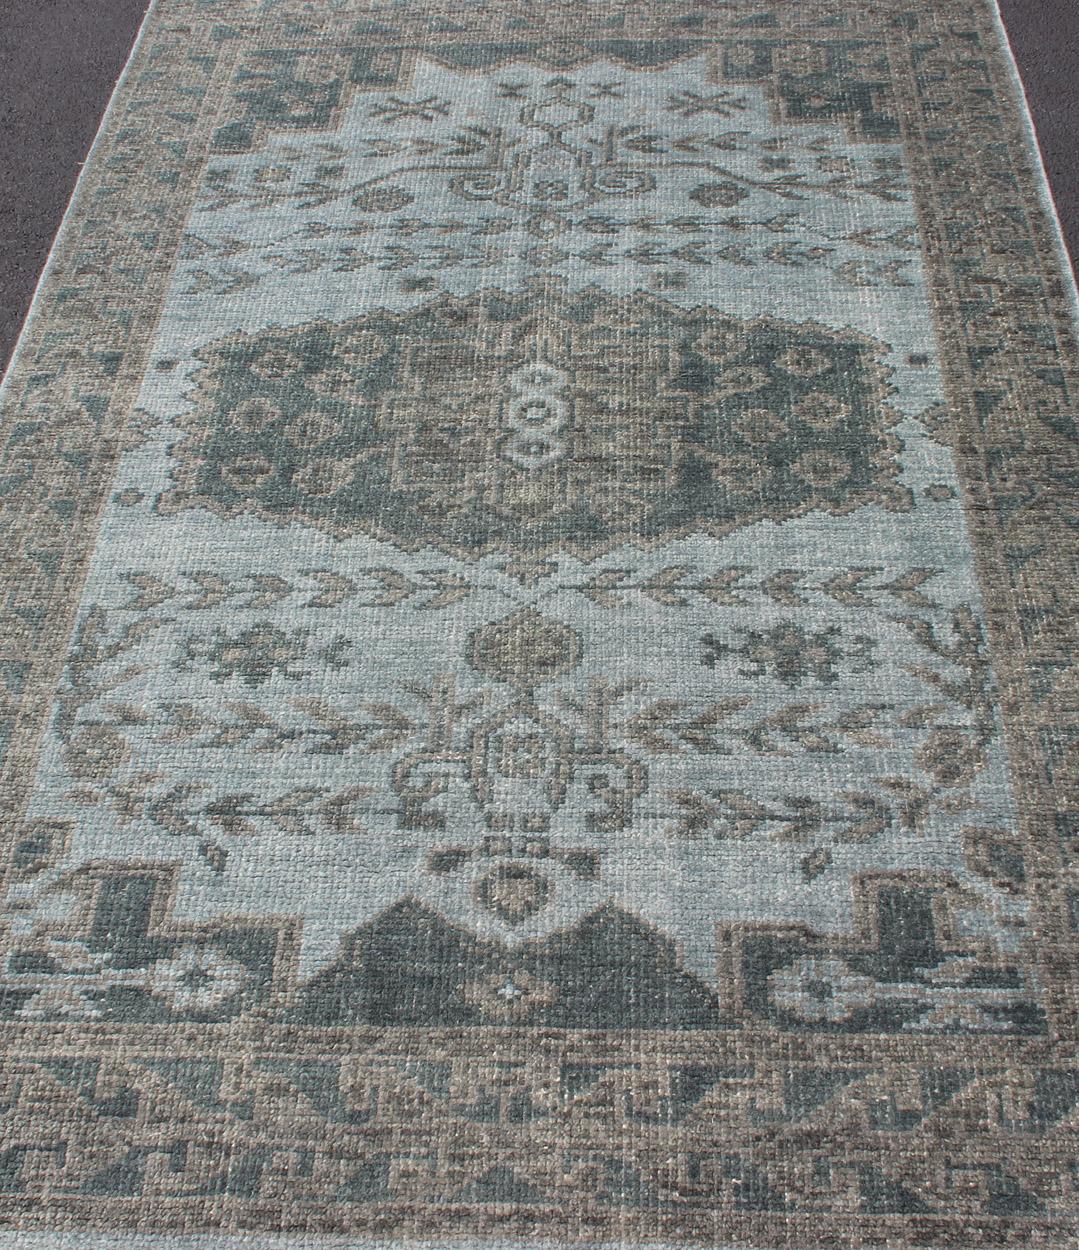 Contemporary Oushak Design Distressed Rug in Gray, Taupe, & Cream with large Medallion Design